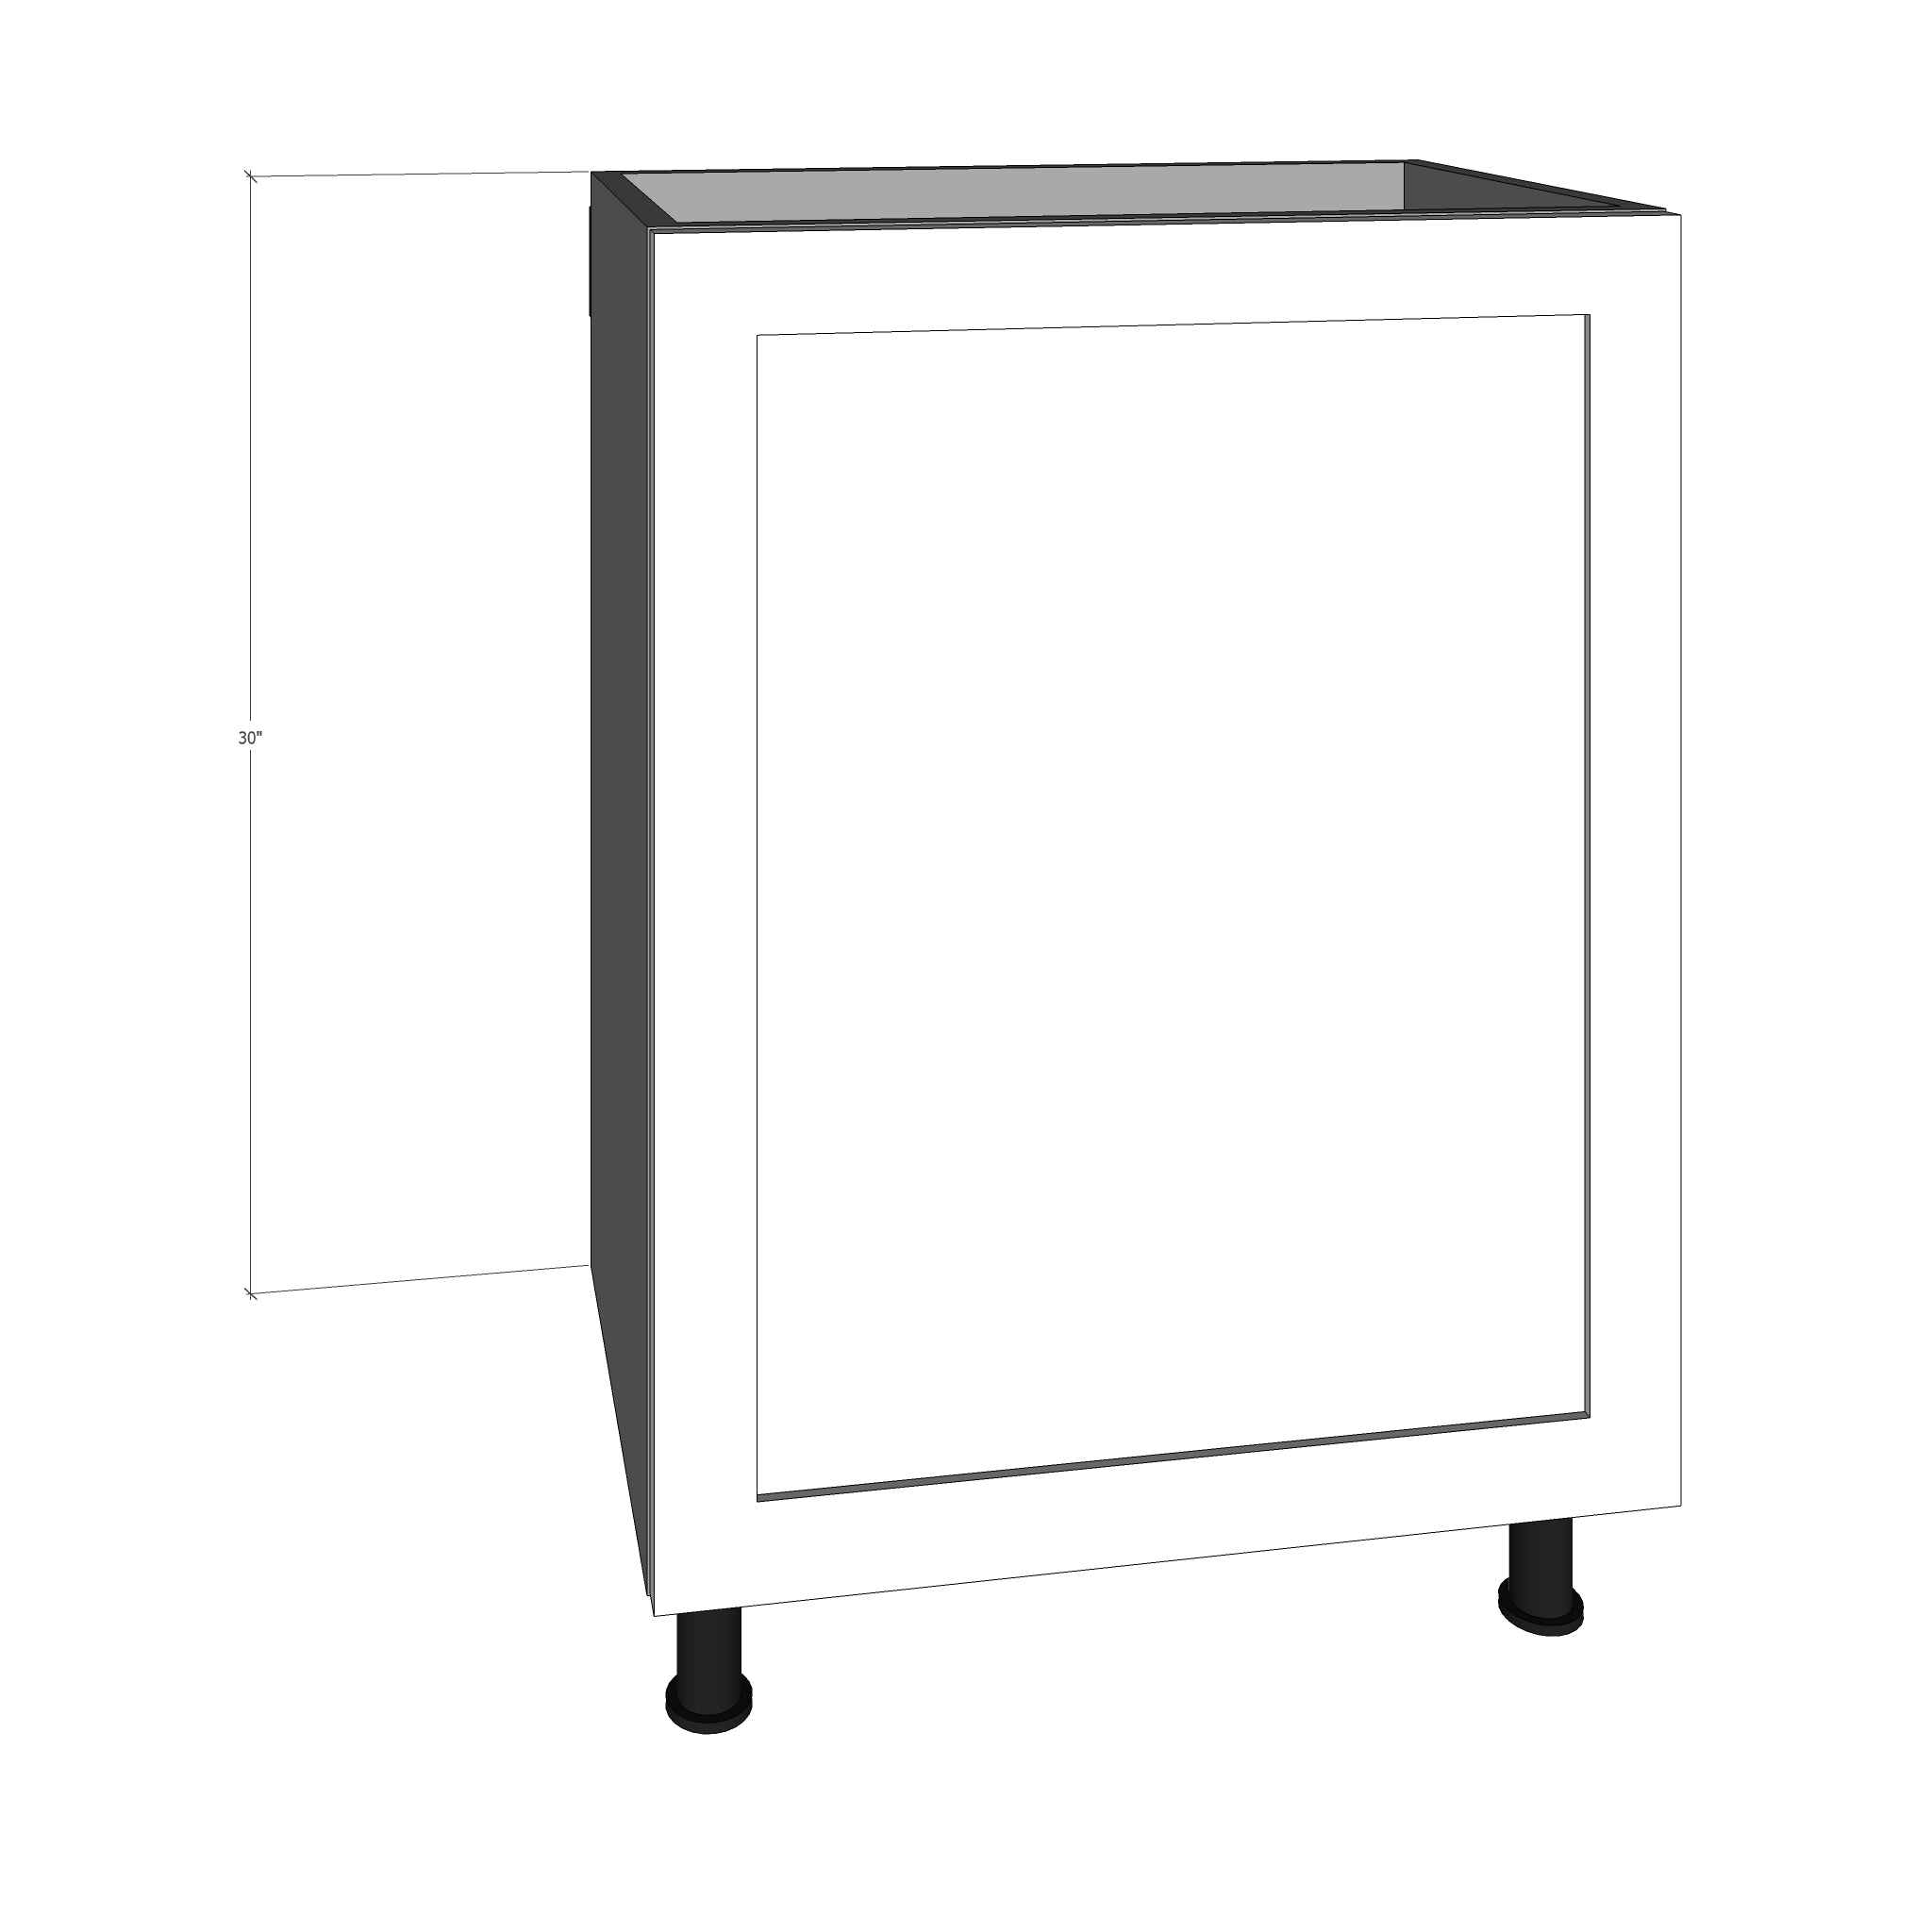 Bpo 24 Pullout Door For 24 W Ikea Sektion Base Cabinet Allstyle